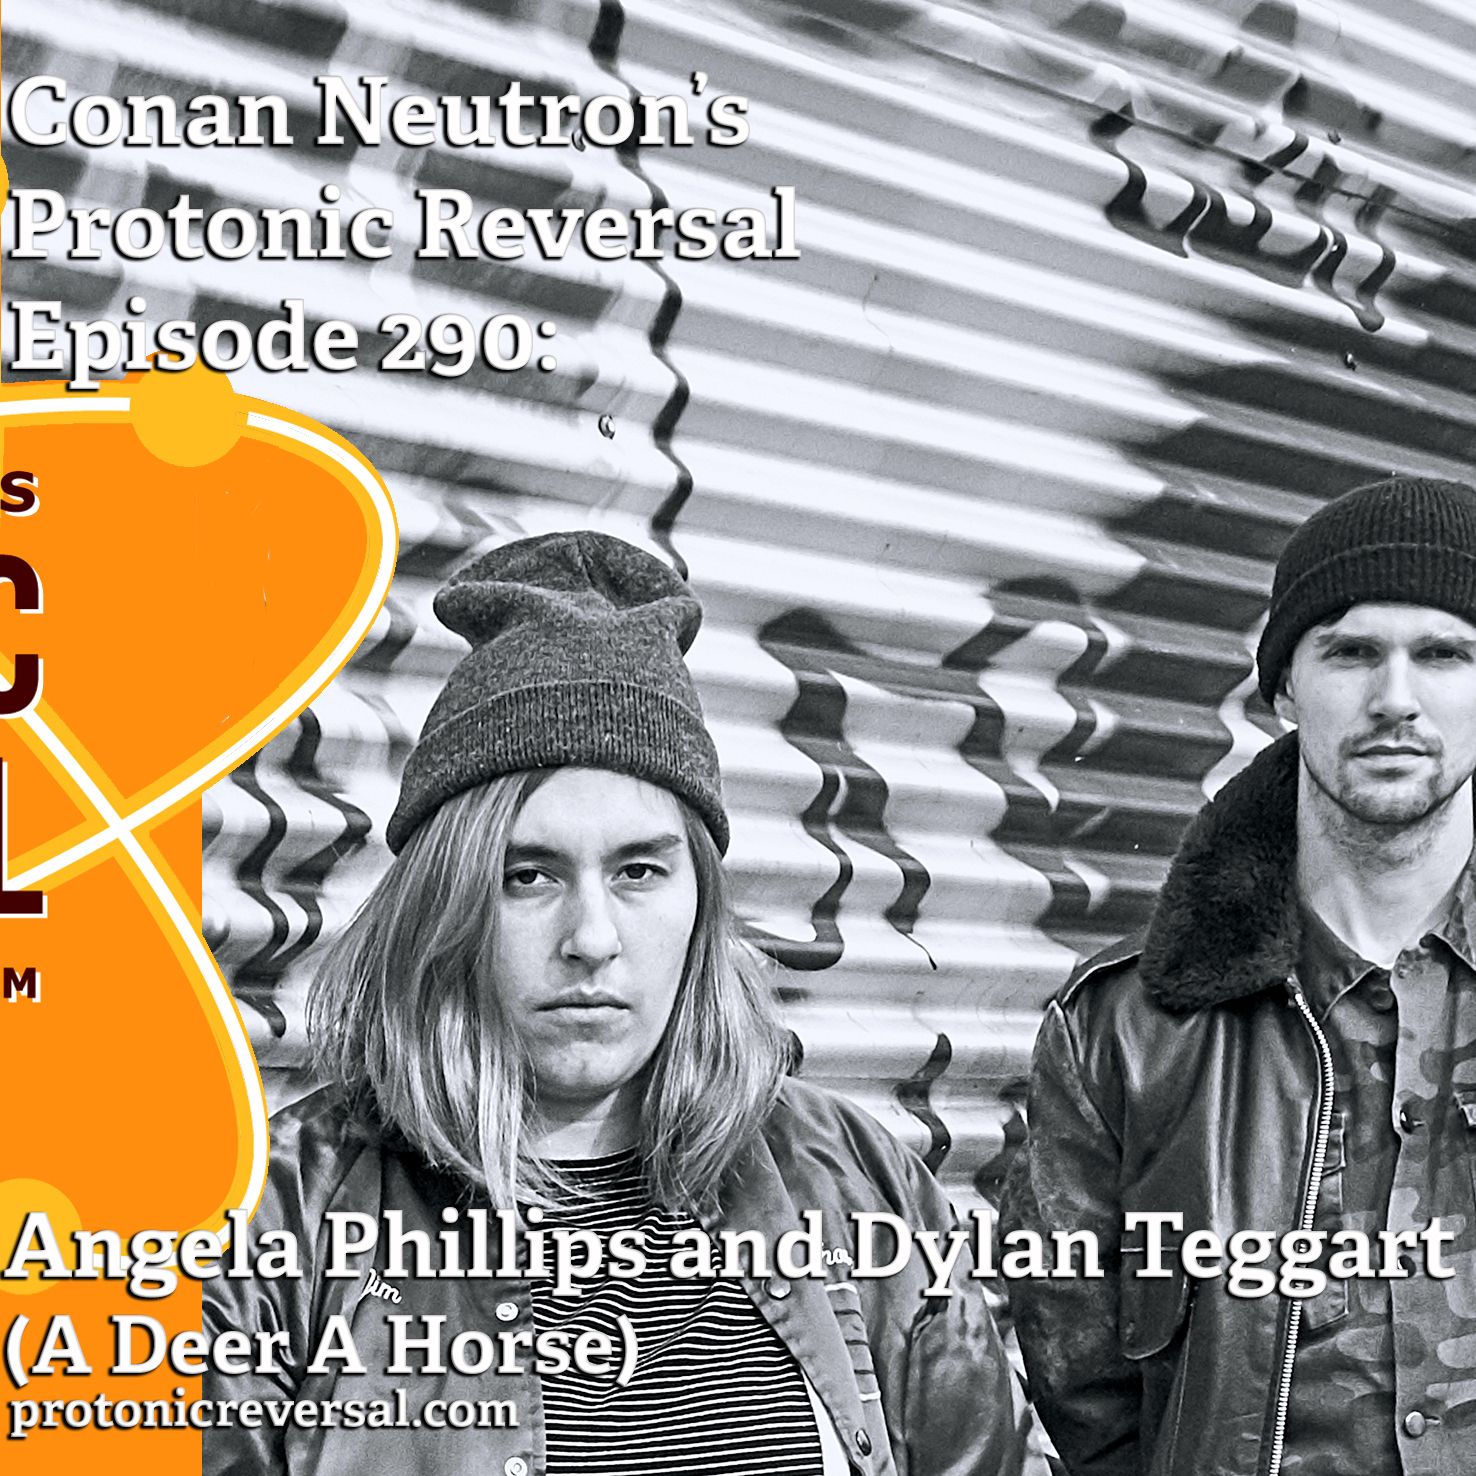 Ep290: Angela Phillips and Dylan Teggart (A Deer A Horse)